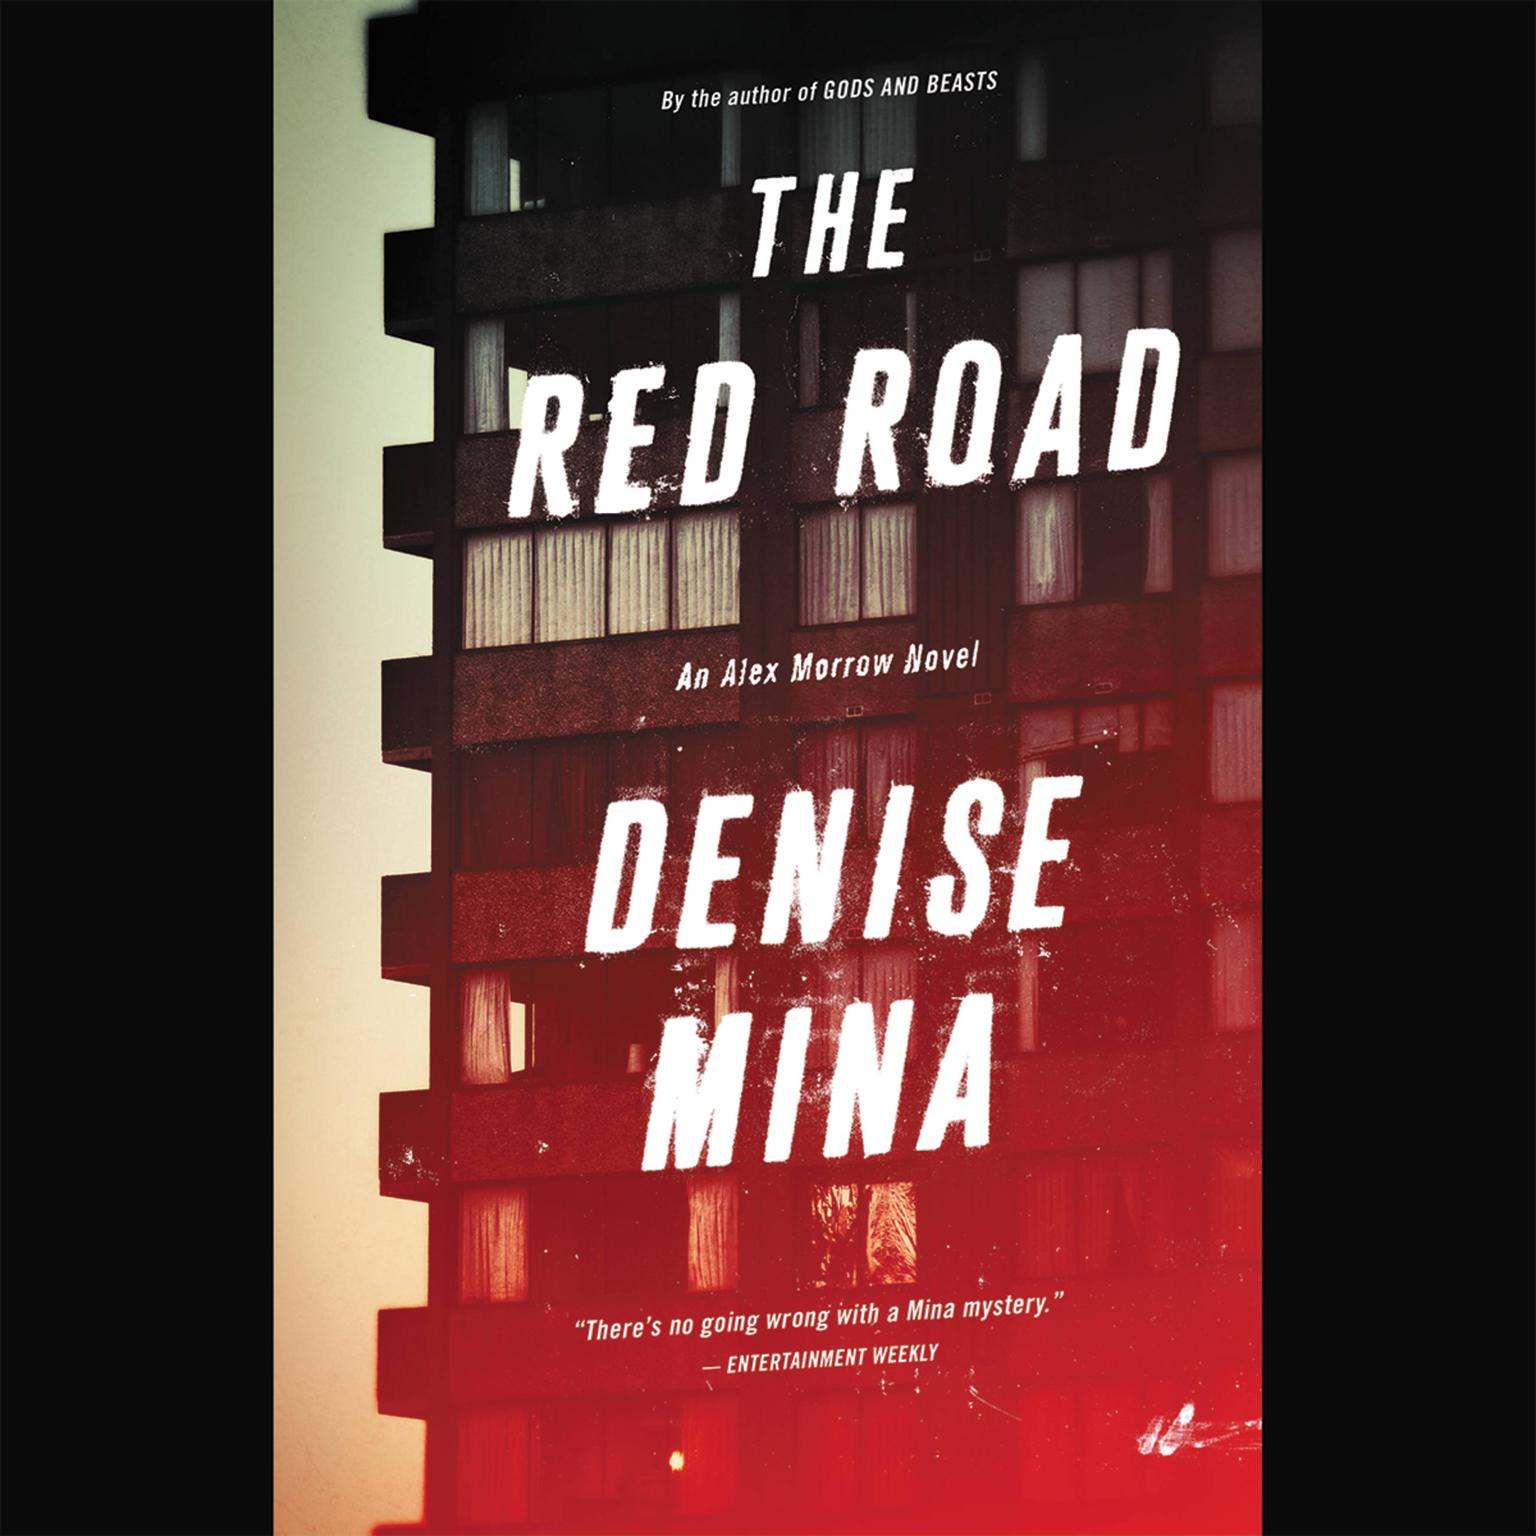 The Red Road: A Novel Audiobook, by Denise Mina